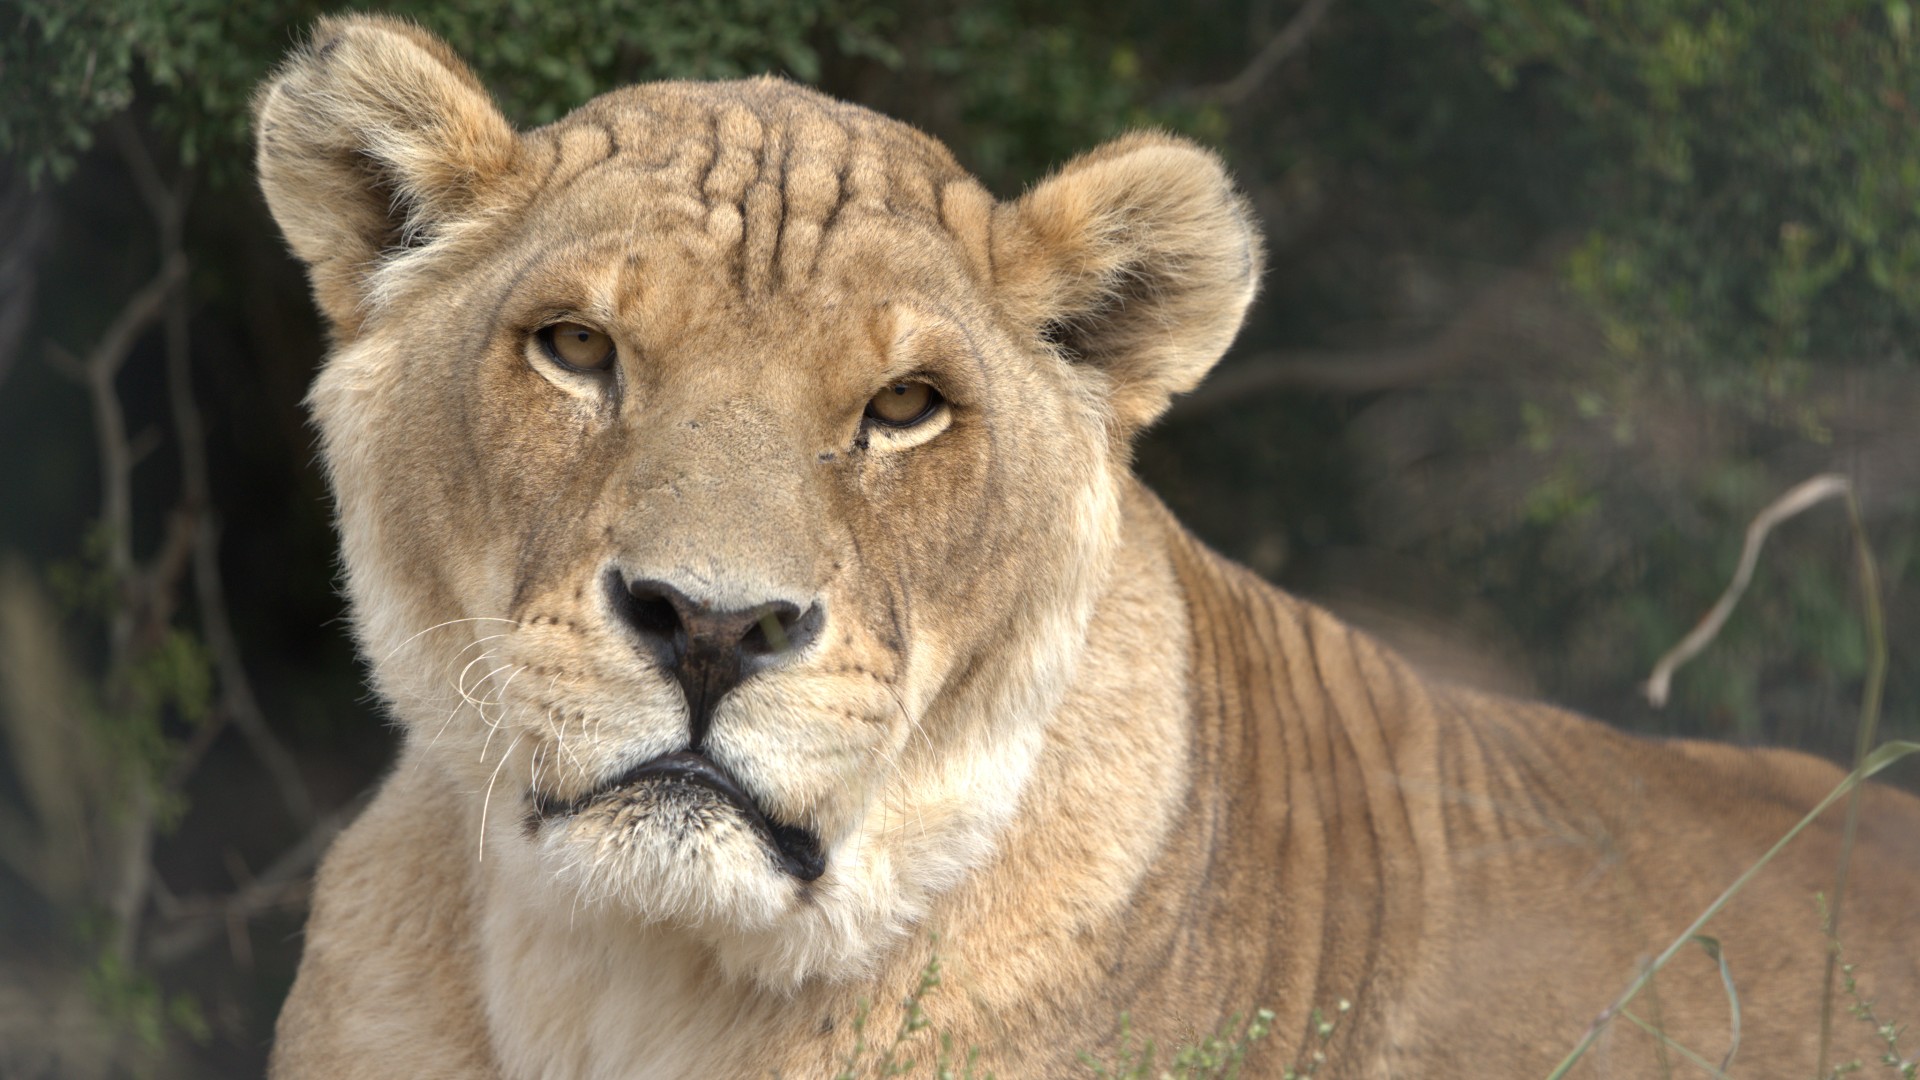 A close-up photo of a male lion with no mane